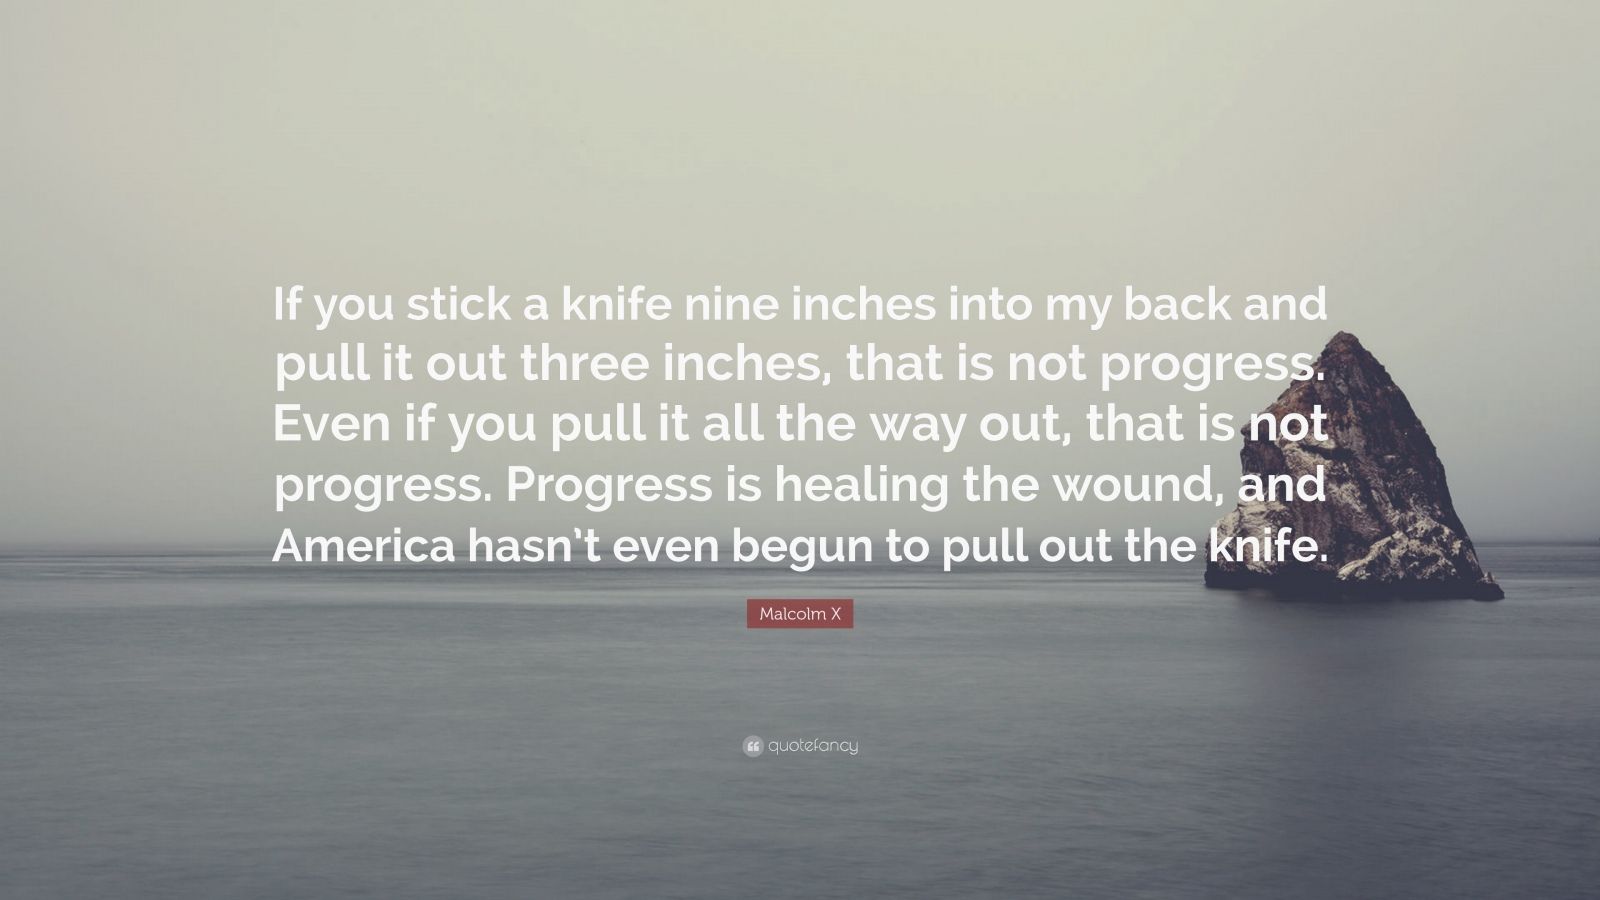 Malcolm X Quote “If you stick a knife nine inches into my